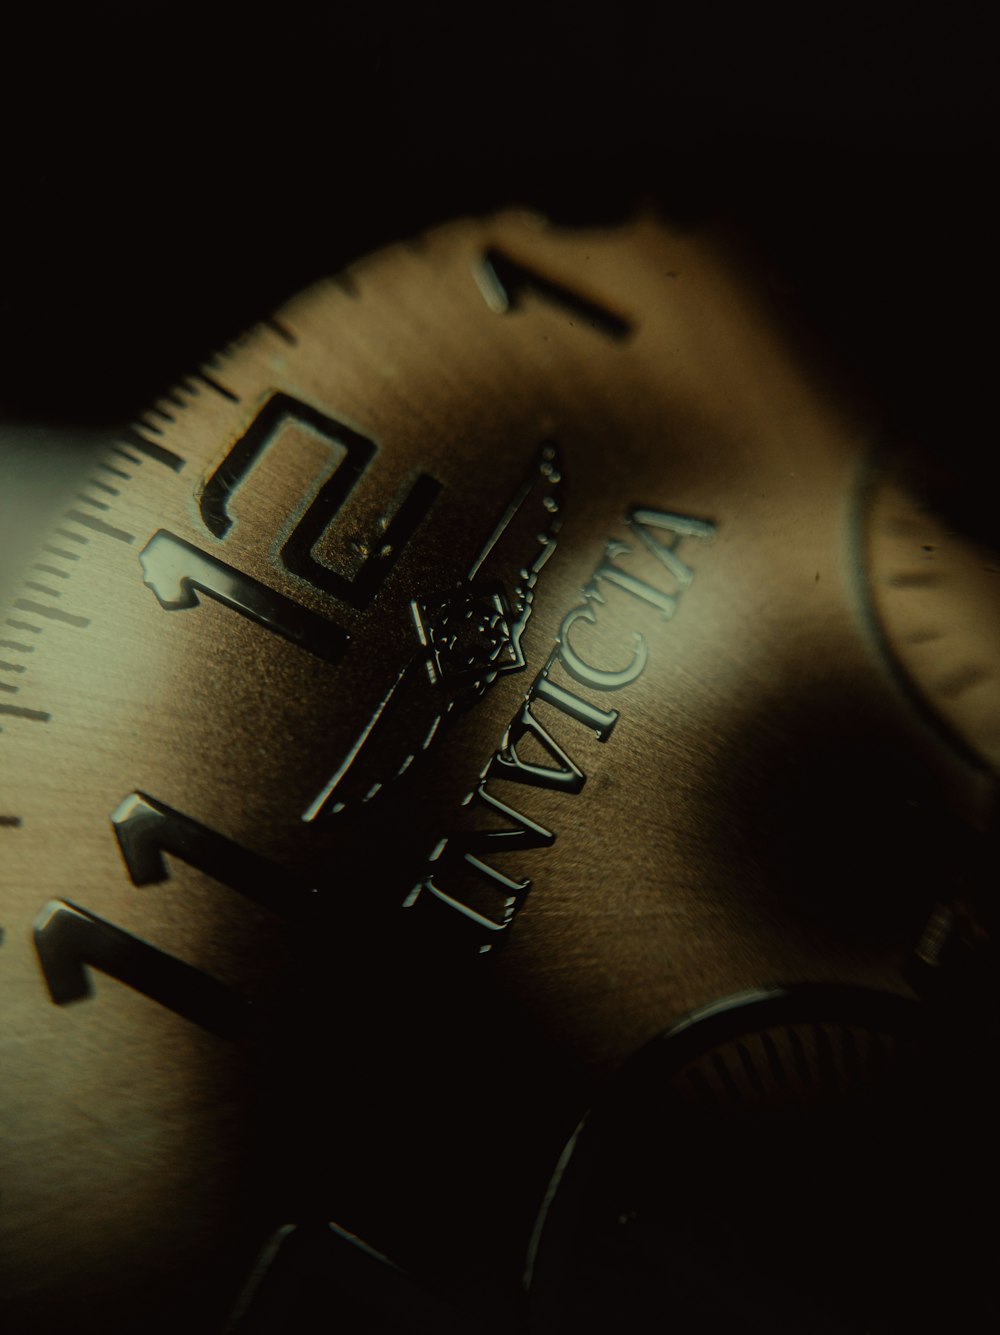 a close up of a watch face with a black background